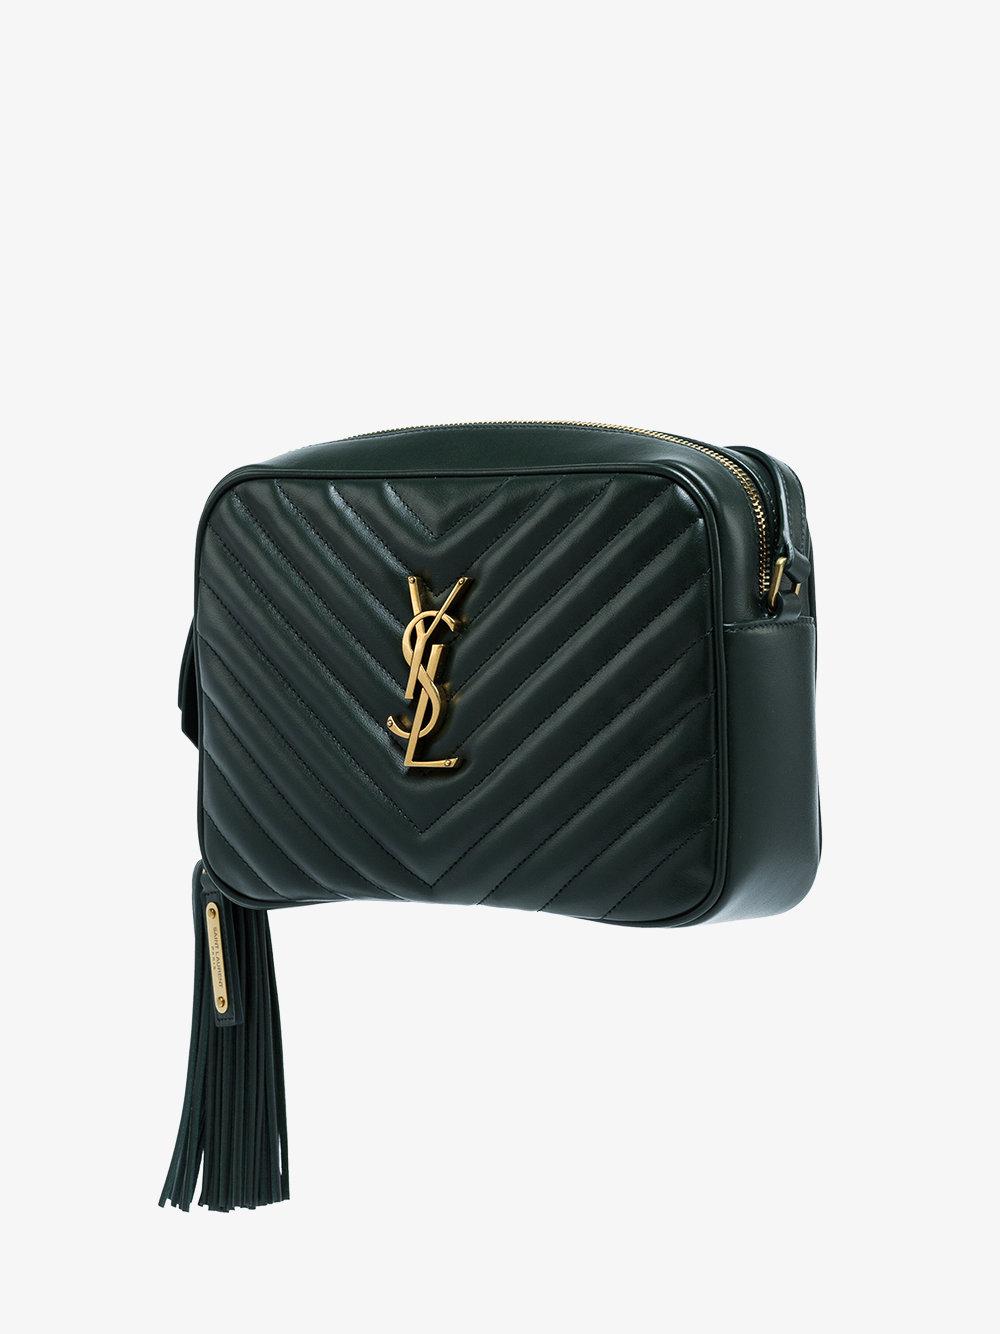 Saint Laurent Green Lou Quilted Leather Camera Bag - Lyst